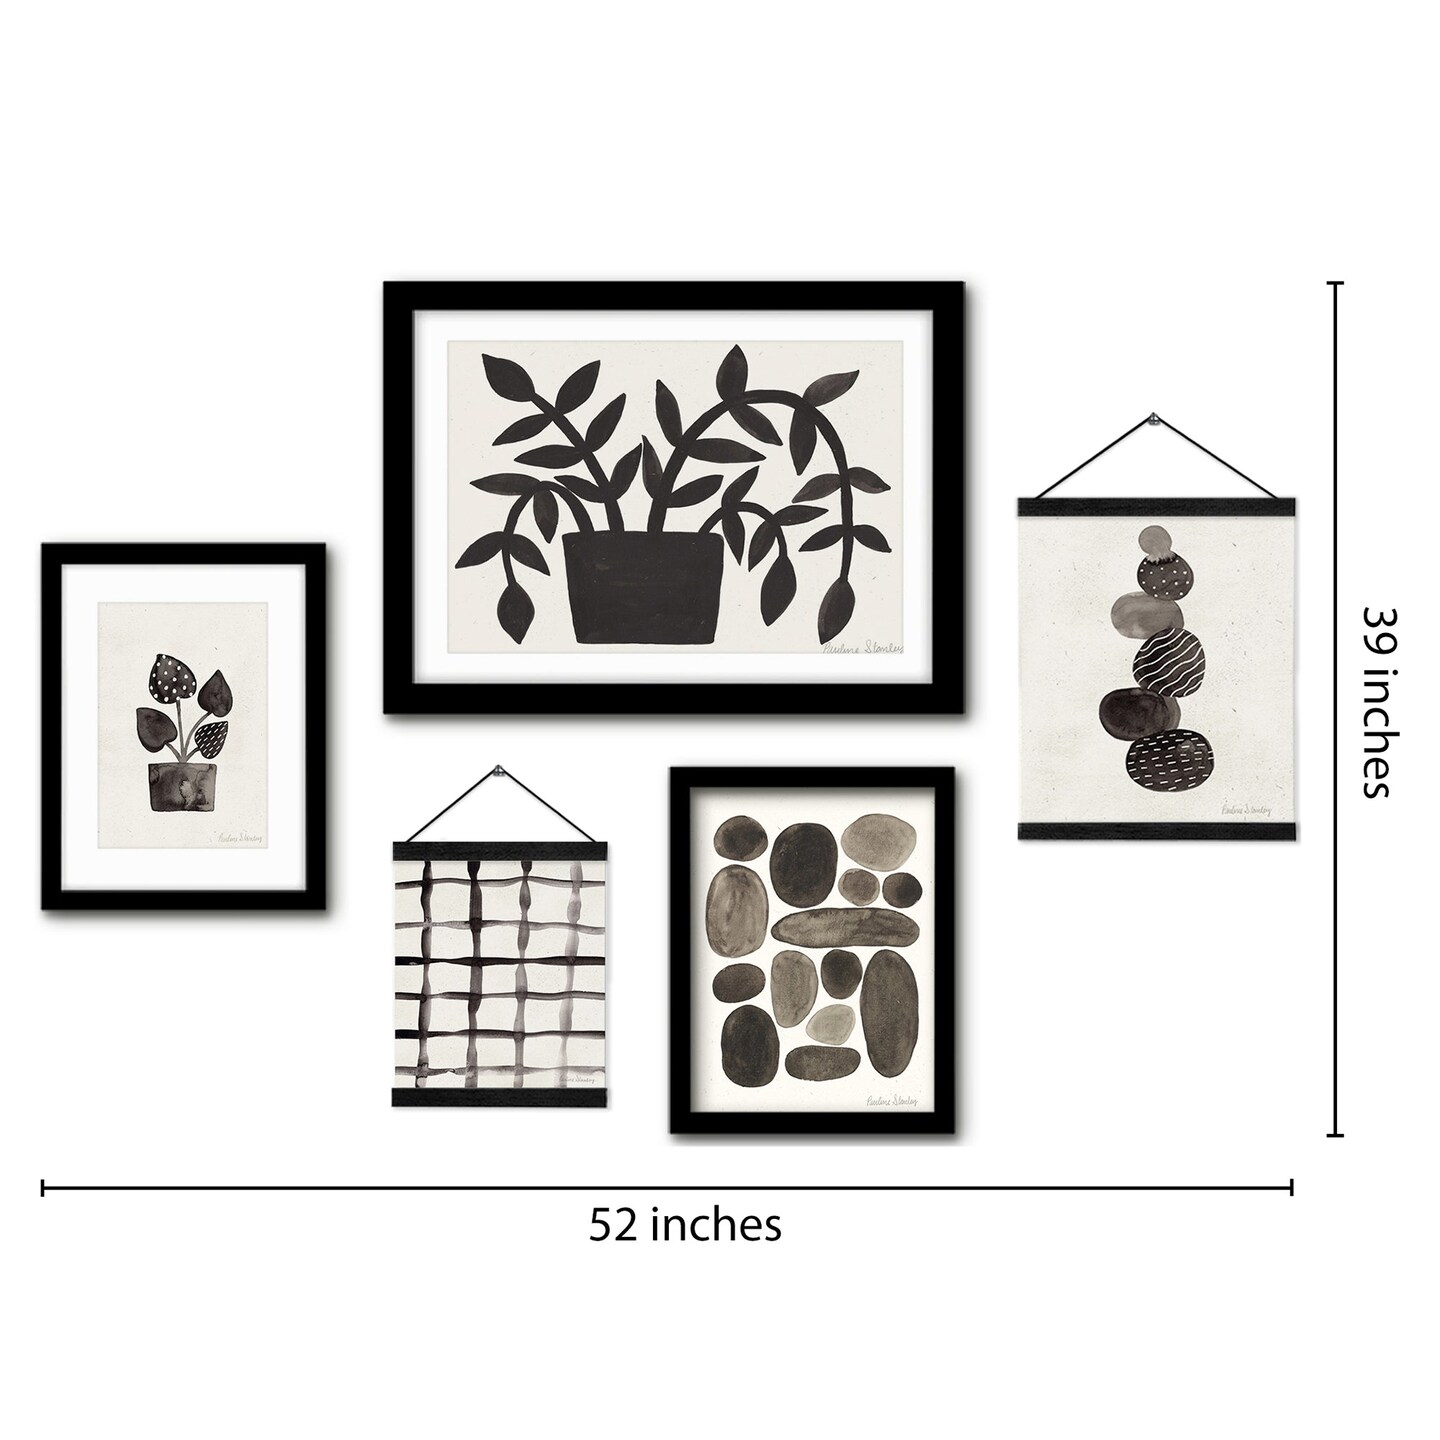 (Set of 5) Framed Multimedia Gallery Wall Art Set - Hot Stones and Houseplants